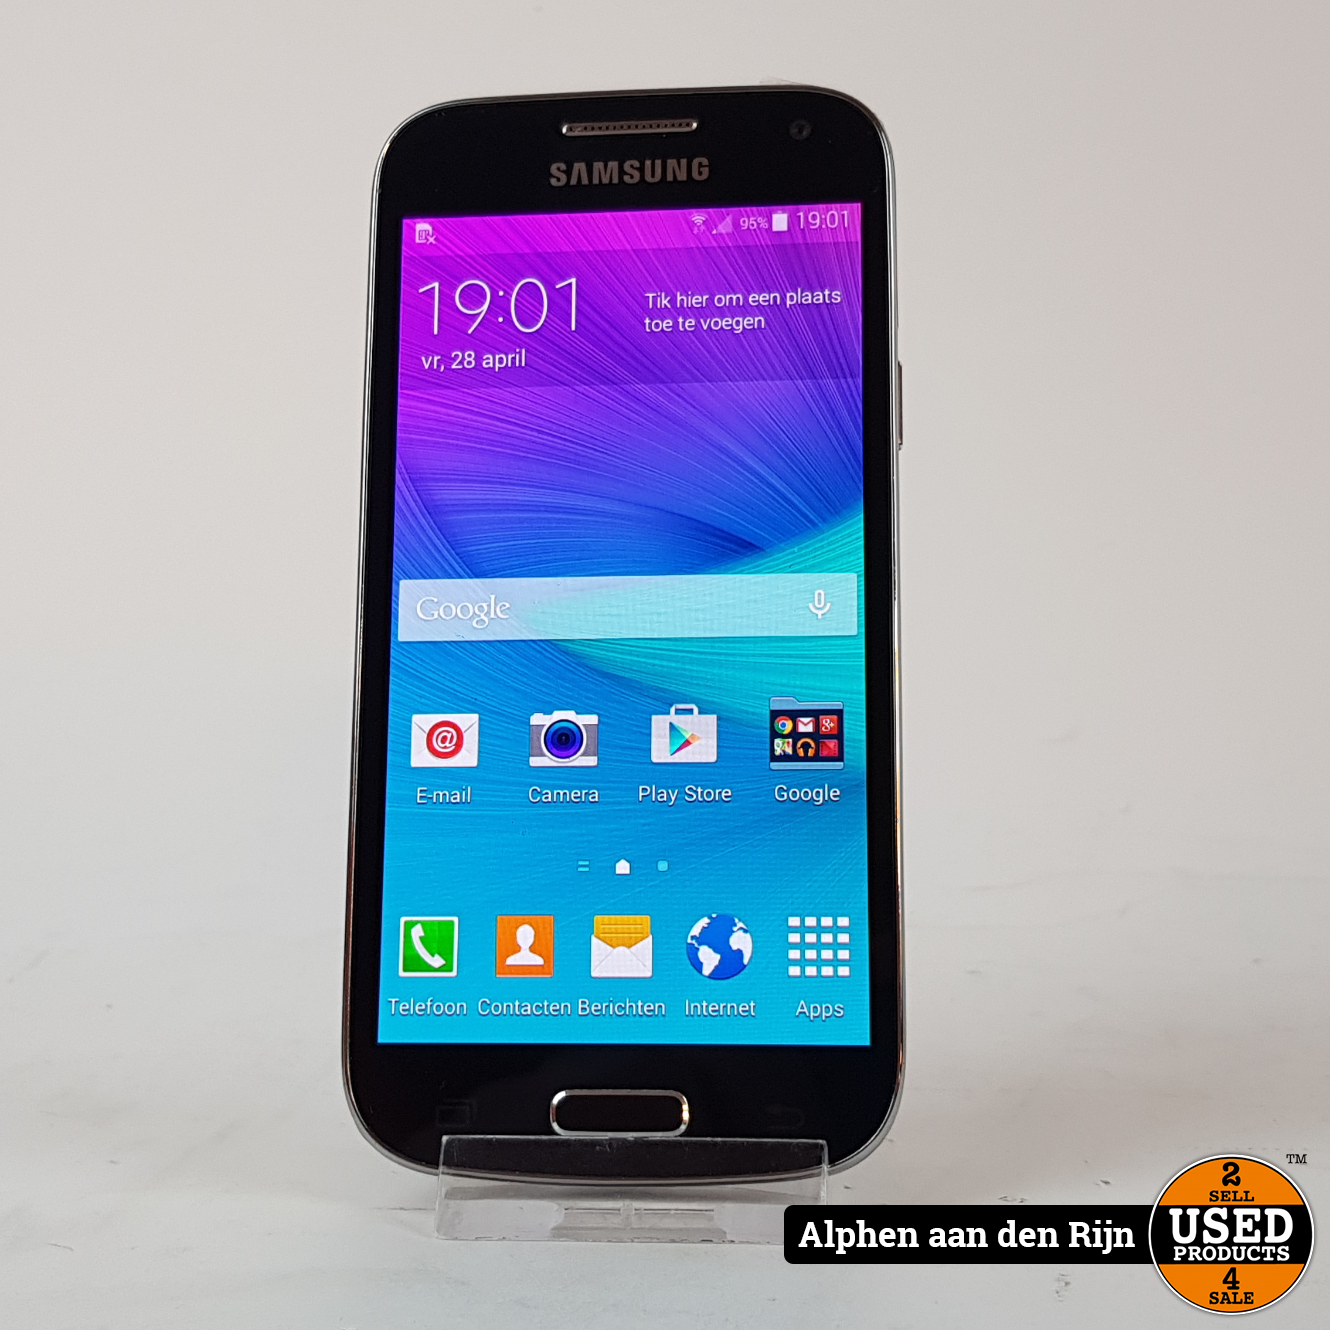 Samsung Galaxy S4 mini 8gb || Android - Used Products Alphen aan den Rijn